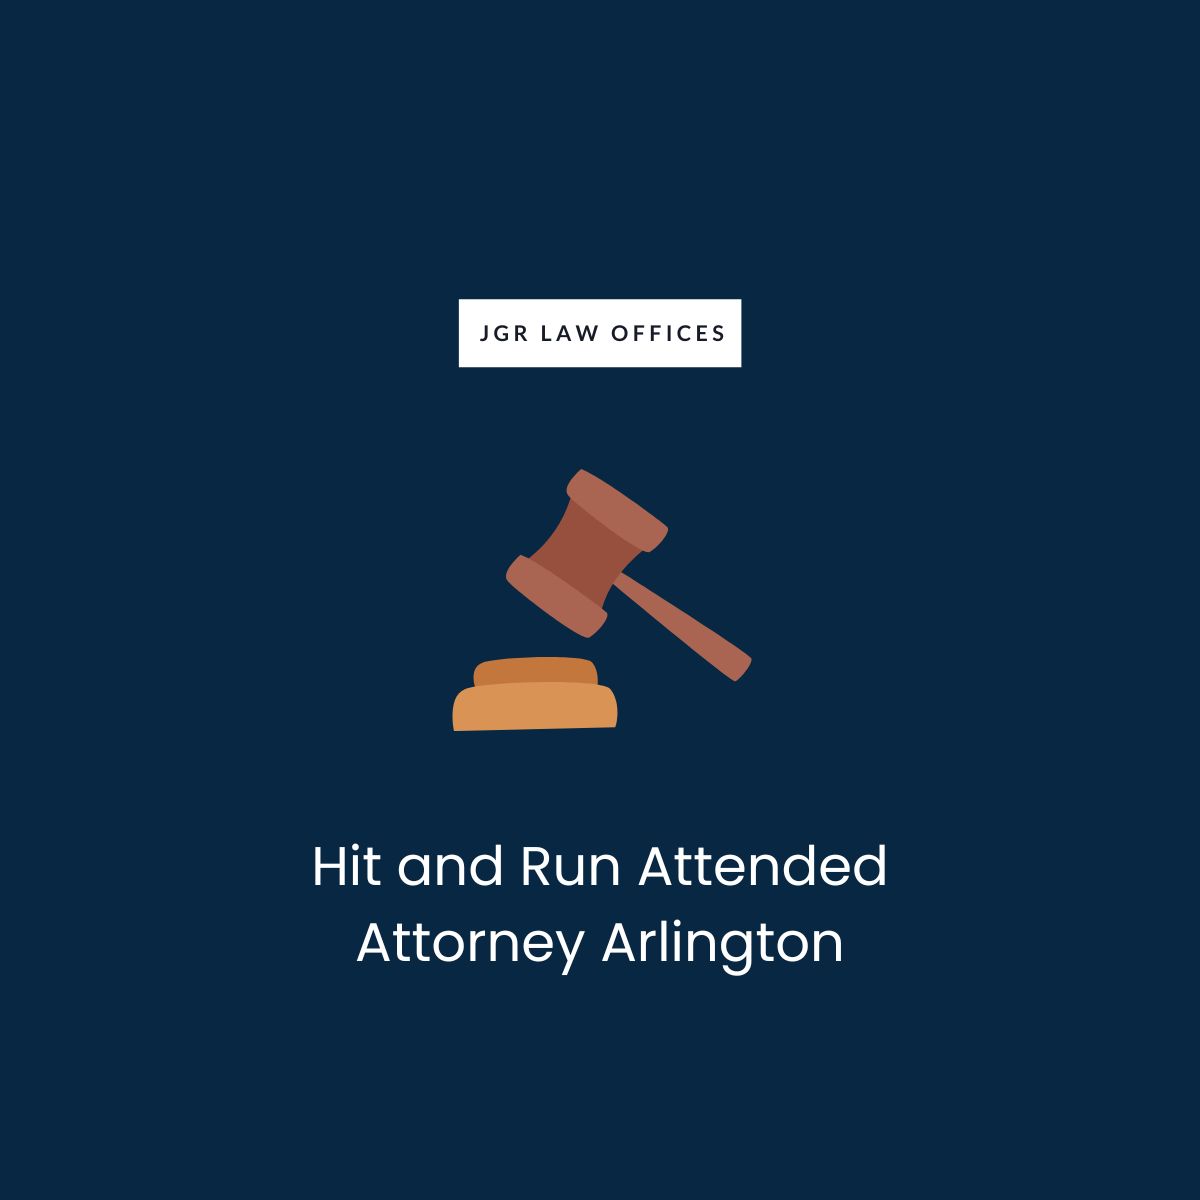 Hit and Run Attended Attorney Arlington